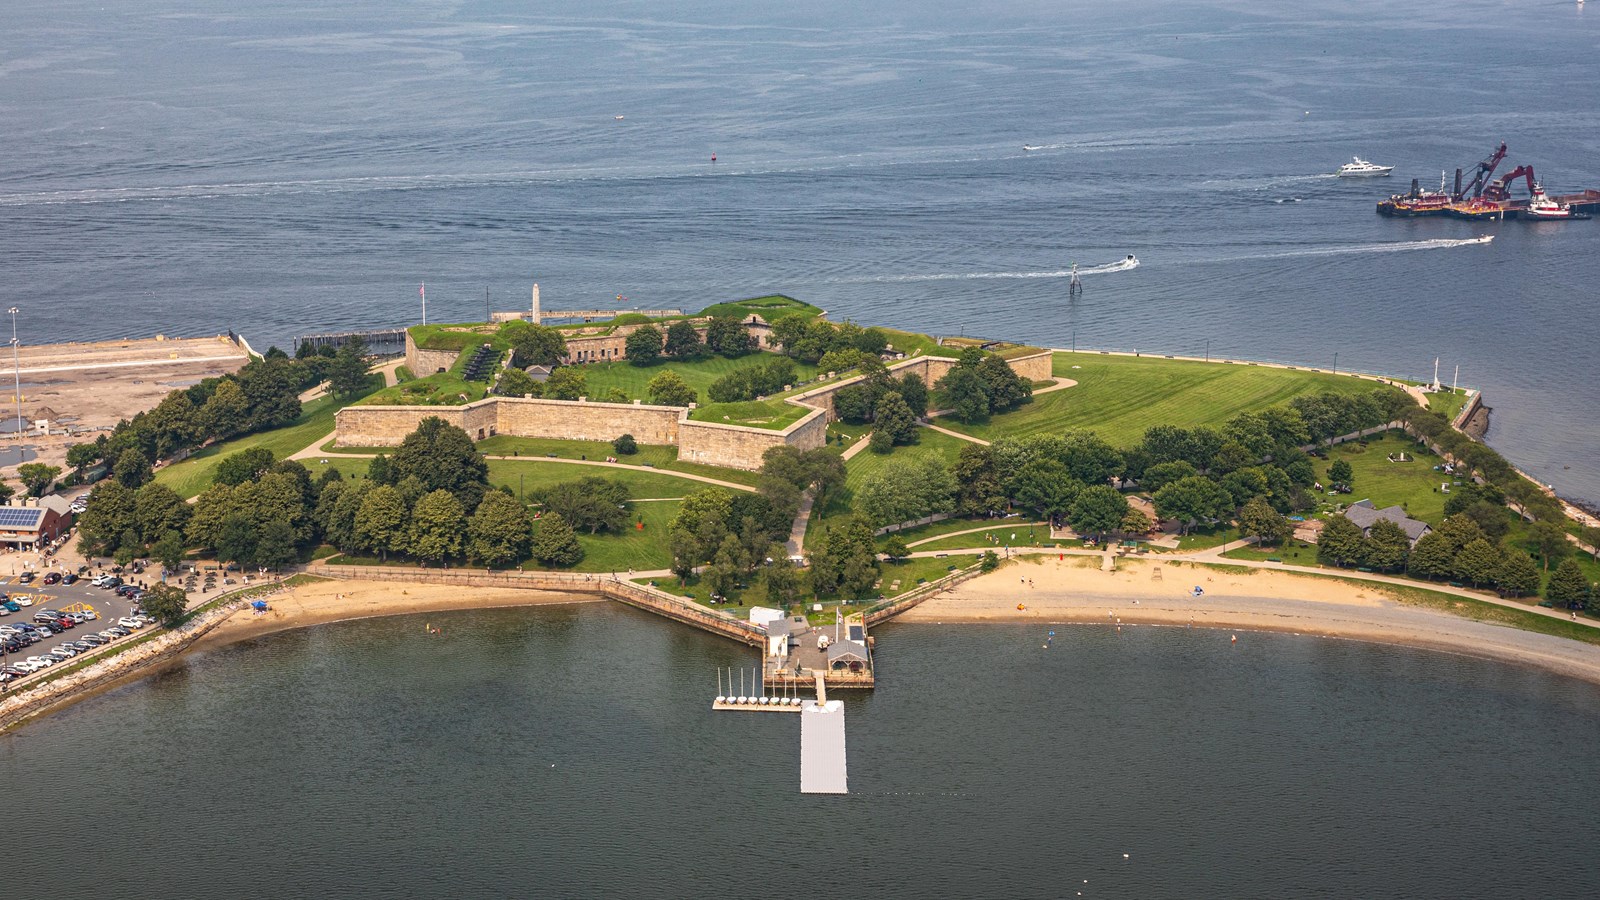 Aerial shot of Castle Island, featuring the harbor as well as the star-shaped Fort Independence